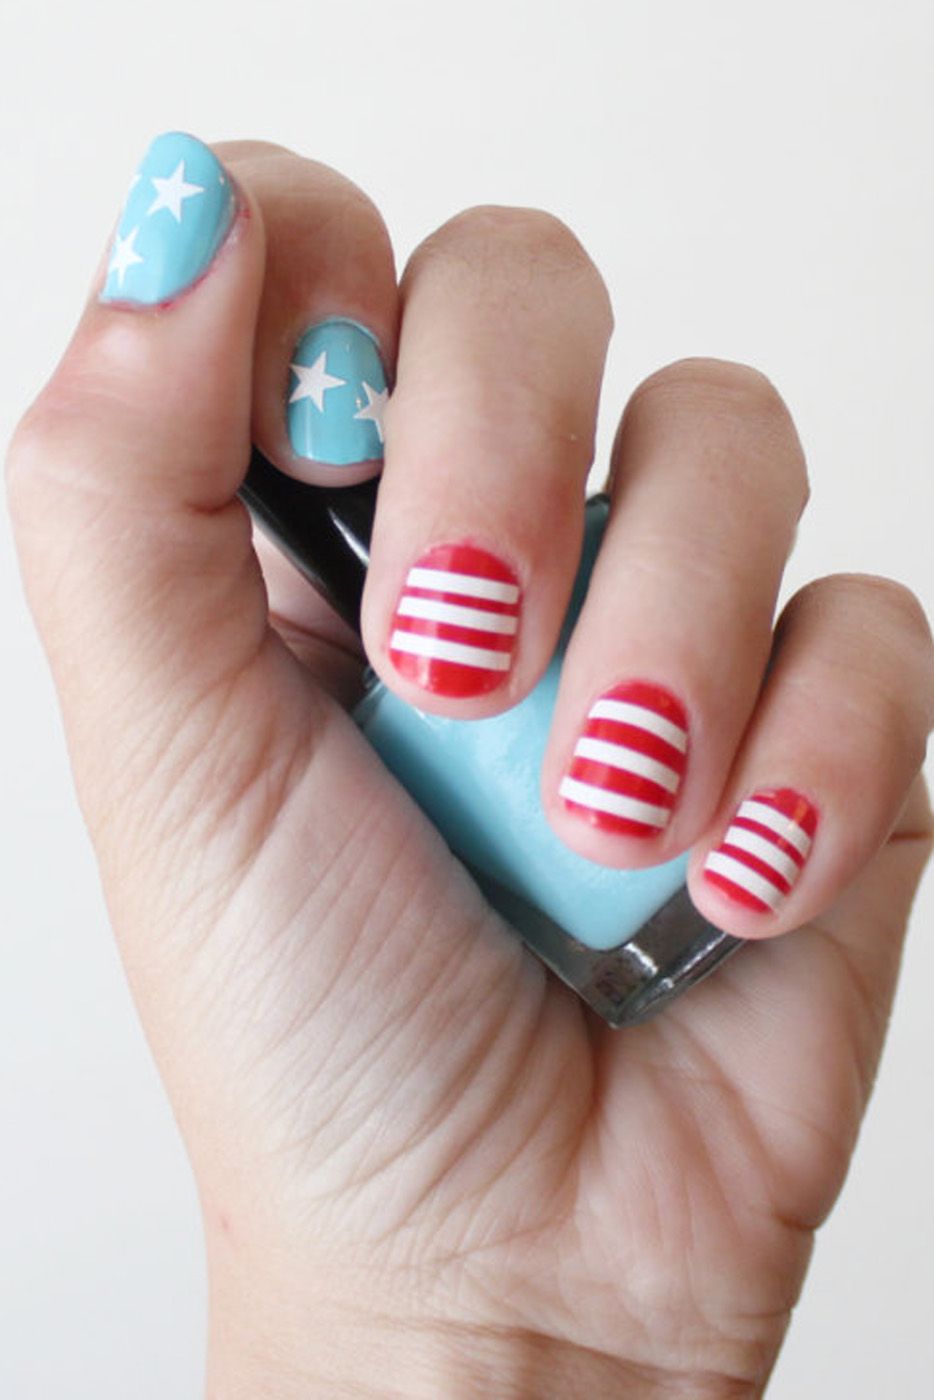 22 Best 4th of July Nail Art Designs - Cool Ideas for Patriotic Fourth of July Nails